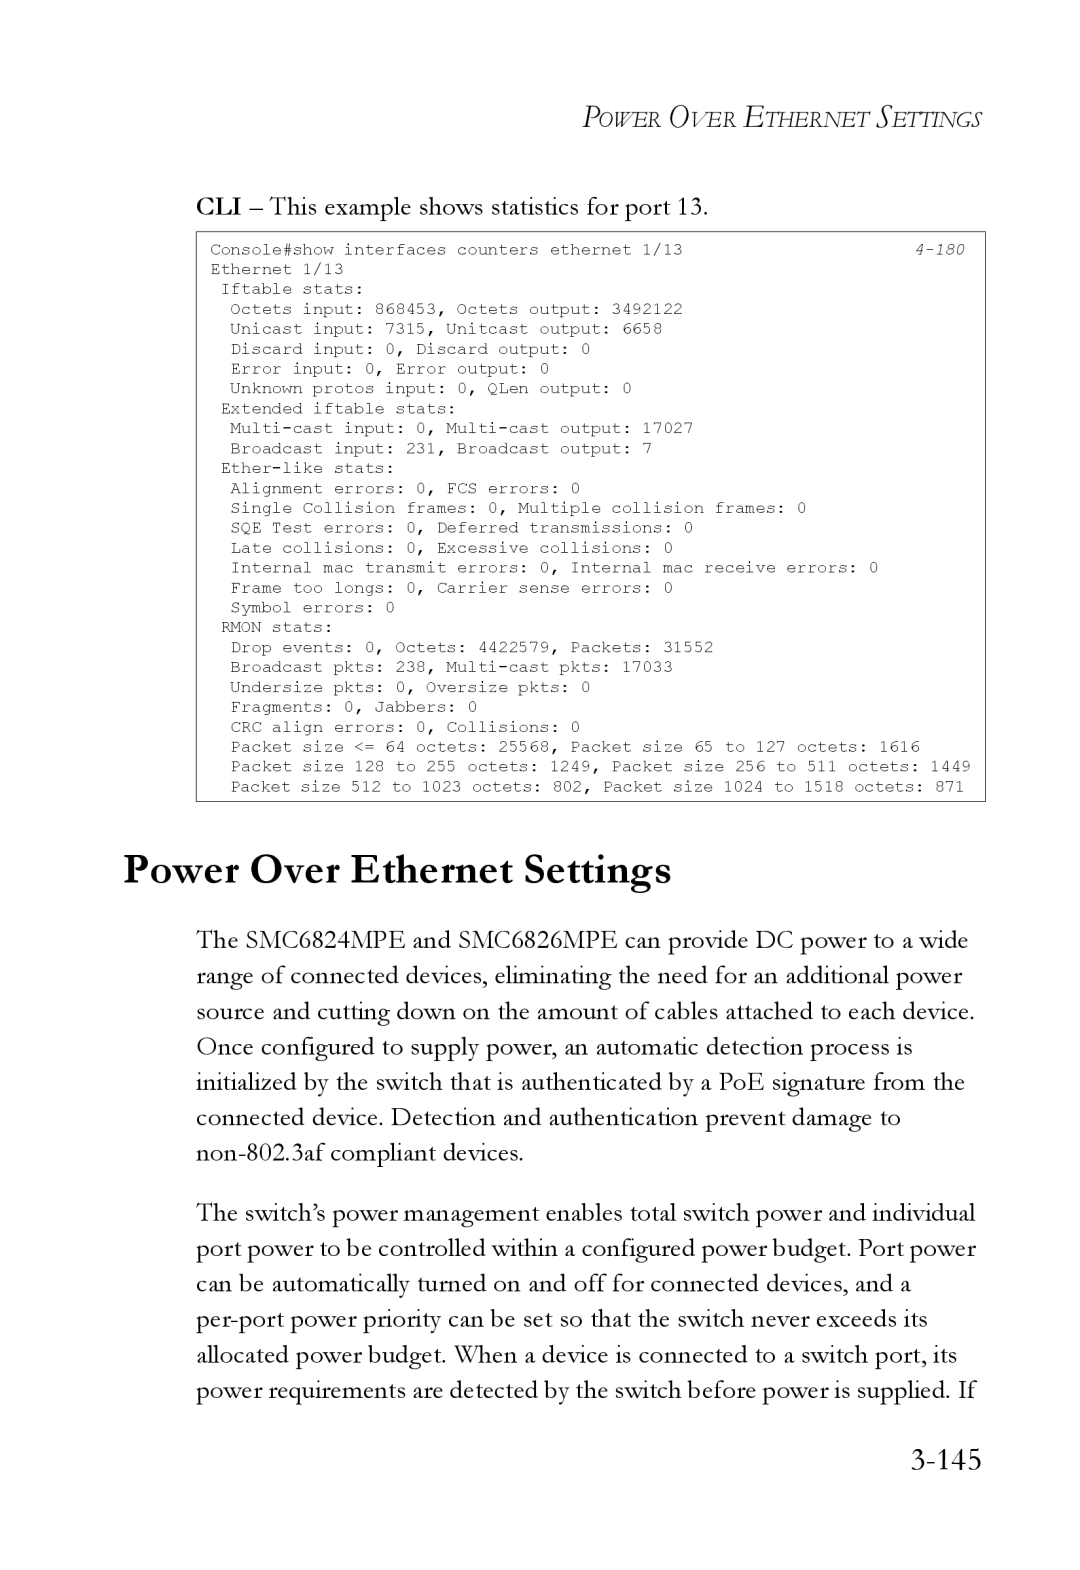 SMC Networks SMC6824M manual Power Over Ethernet Settings, 145, CLI This example shows statistics for port 